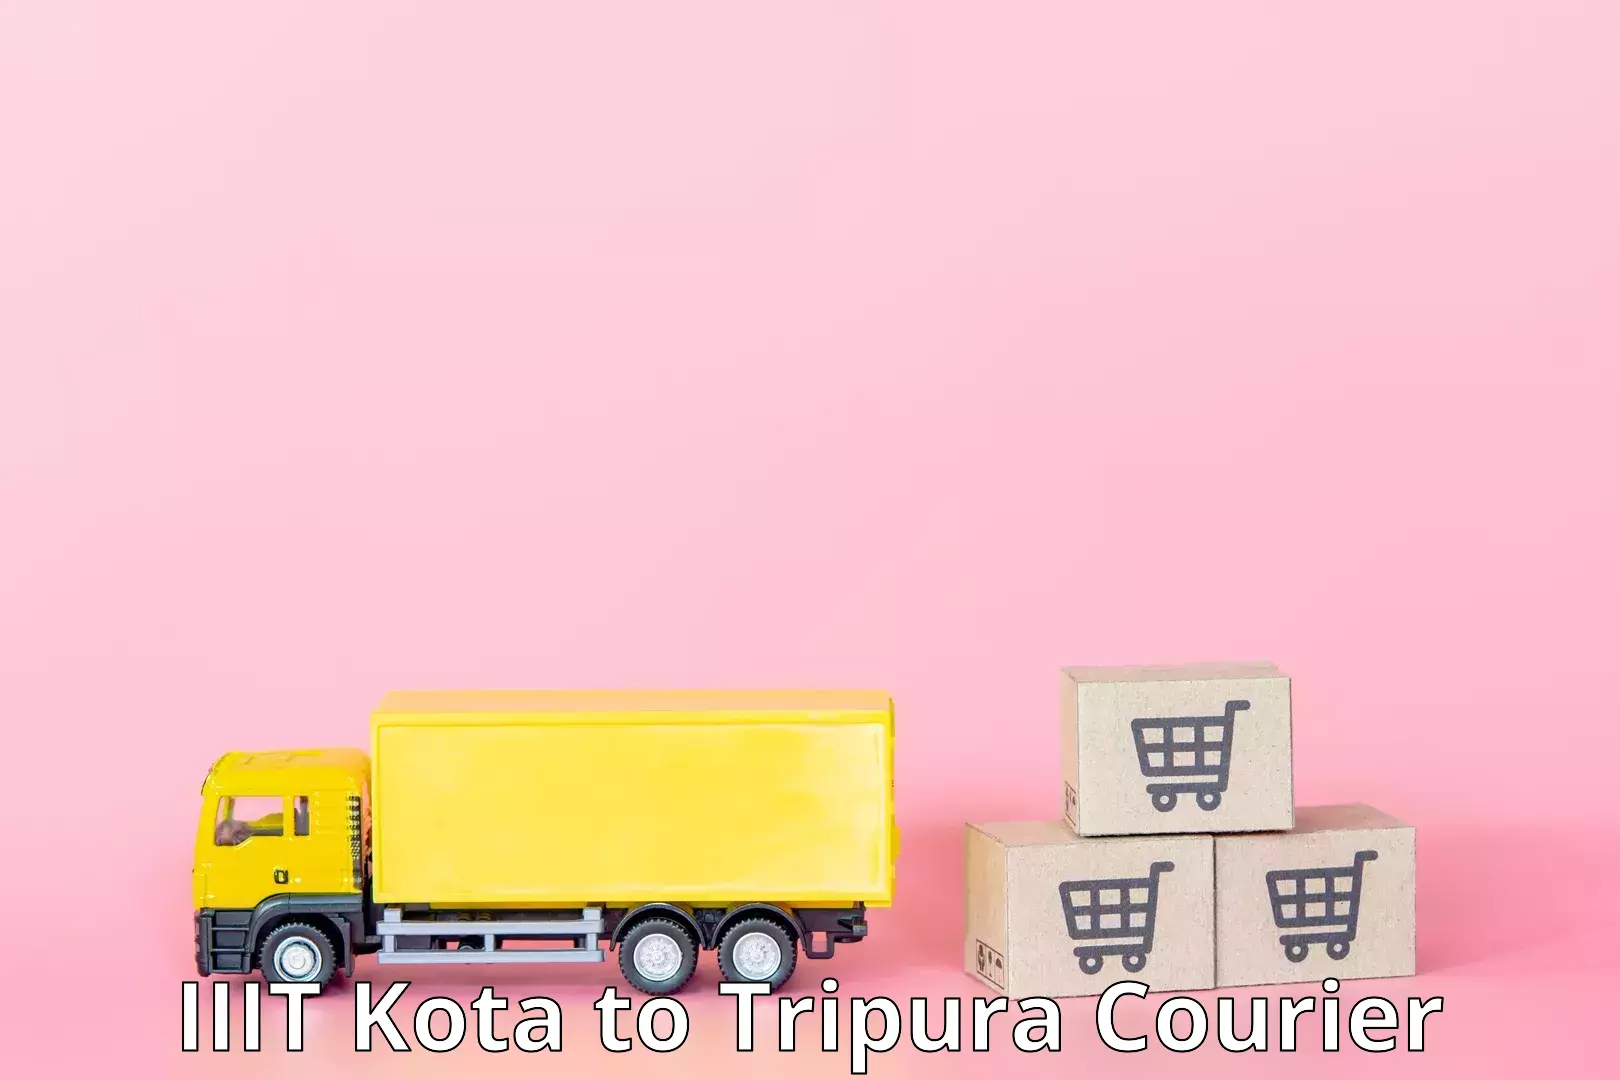 Air courier services IIIT Kota to Udaipur Tripura